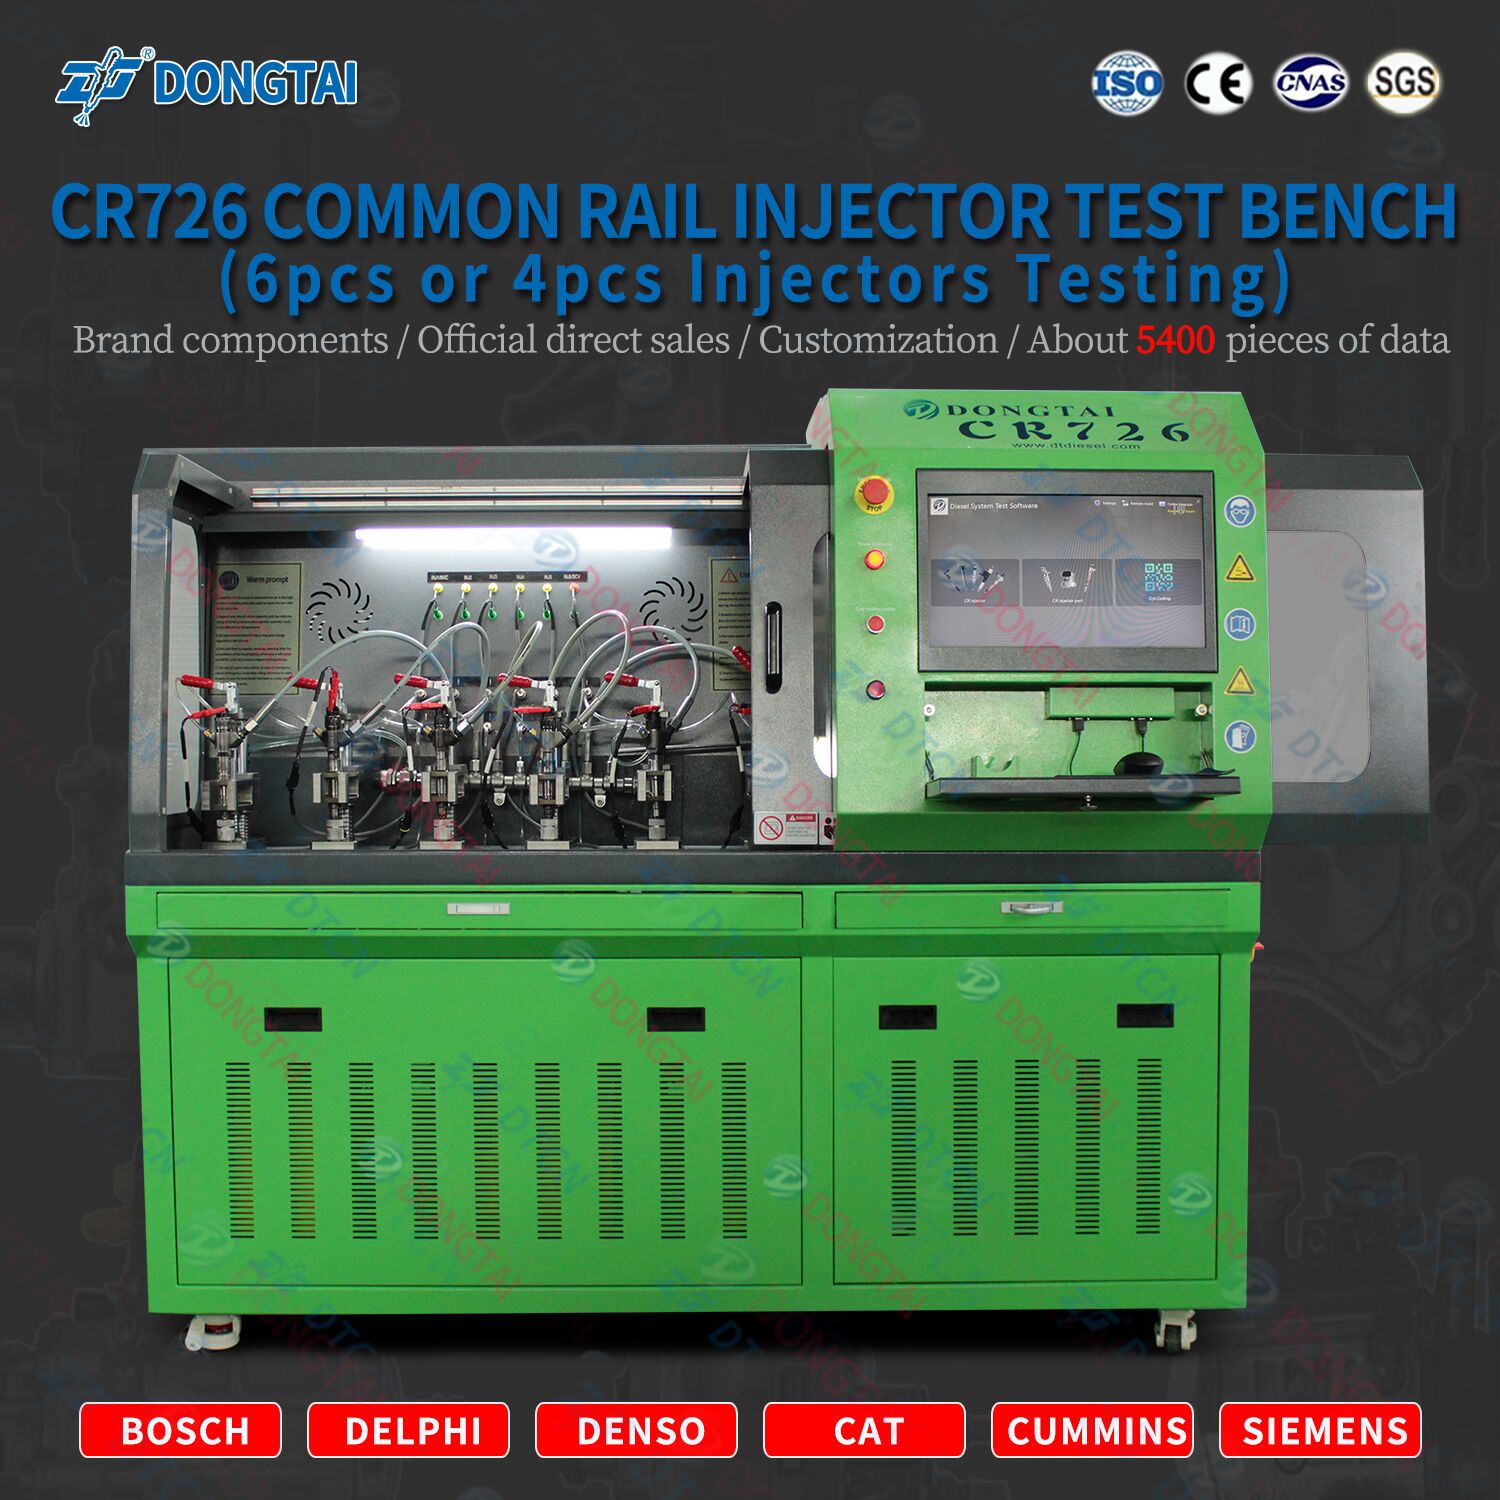 CR726 COMMON INJECTOR TEST BENCH Featured Image